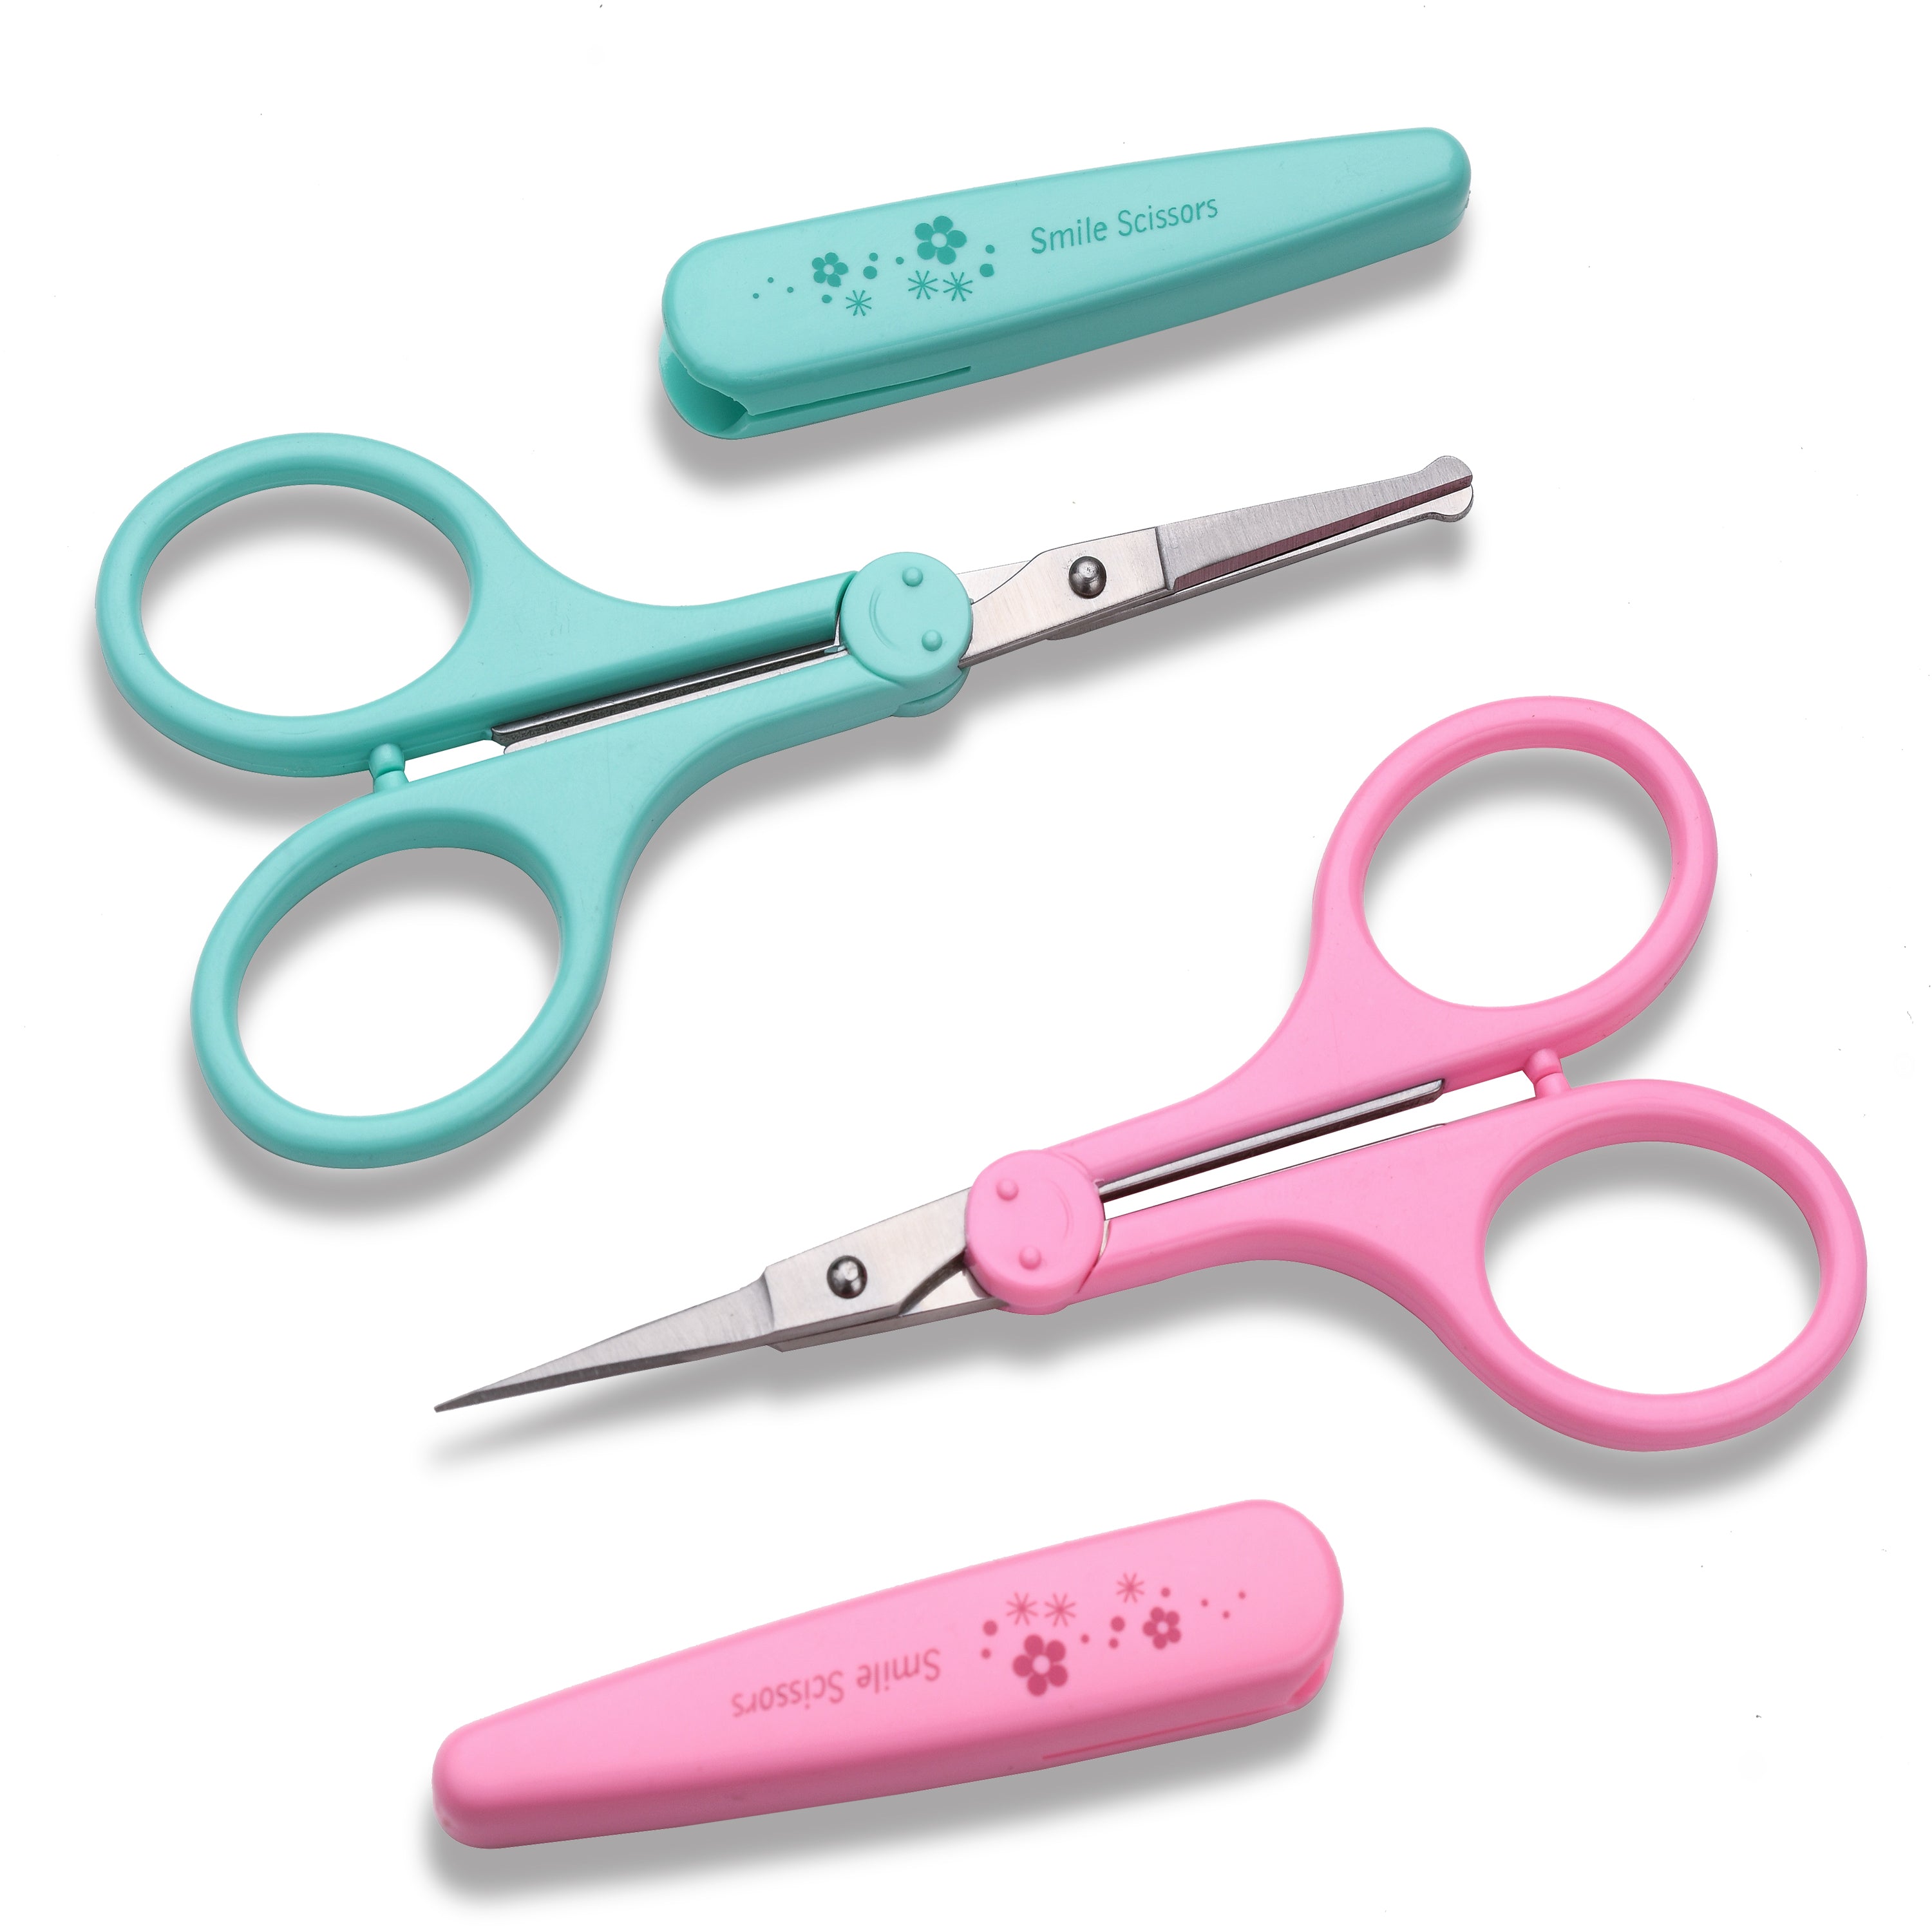 PAFASON Sharpest & Precise Stainless Steel Curved Straight Thread Yarn  Fabric Cutting Mini Scissors with Protective Cover - Ideal for Embroidery